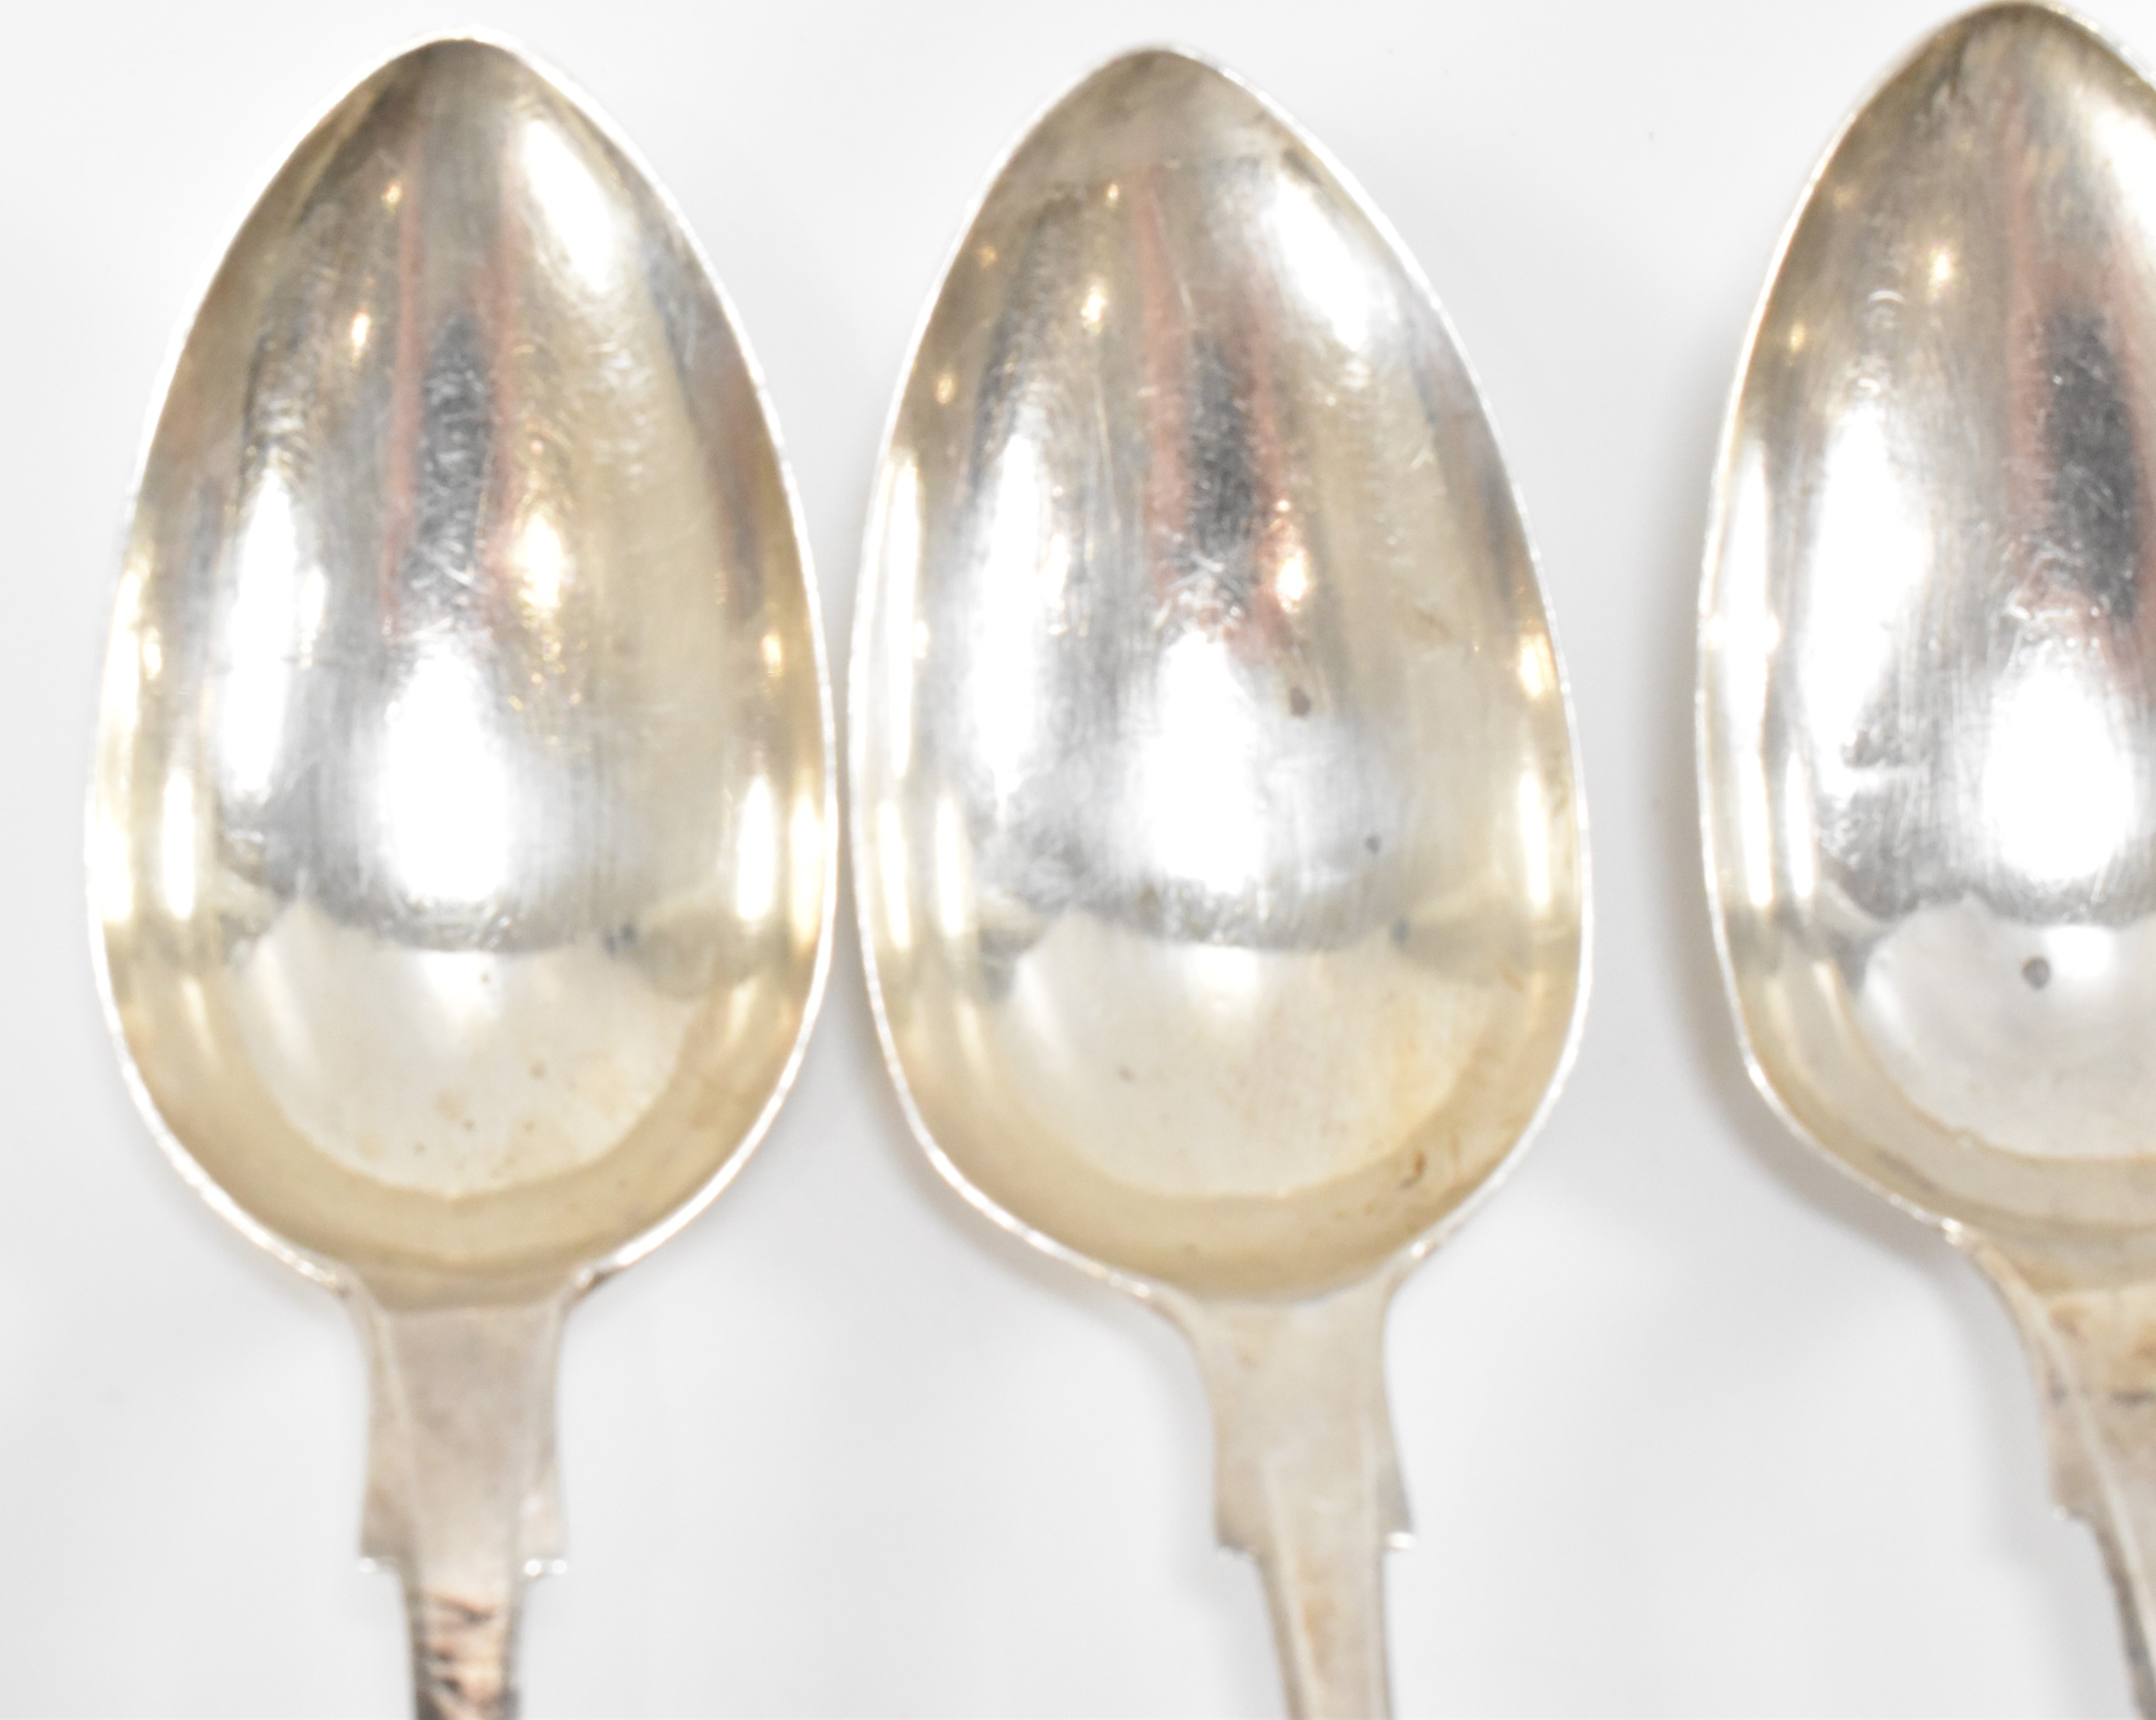 SIX VICTORIAN SILVER TEASPOONS - Image 4 of 6